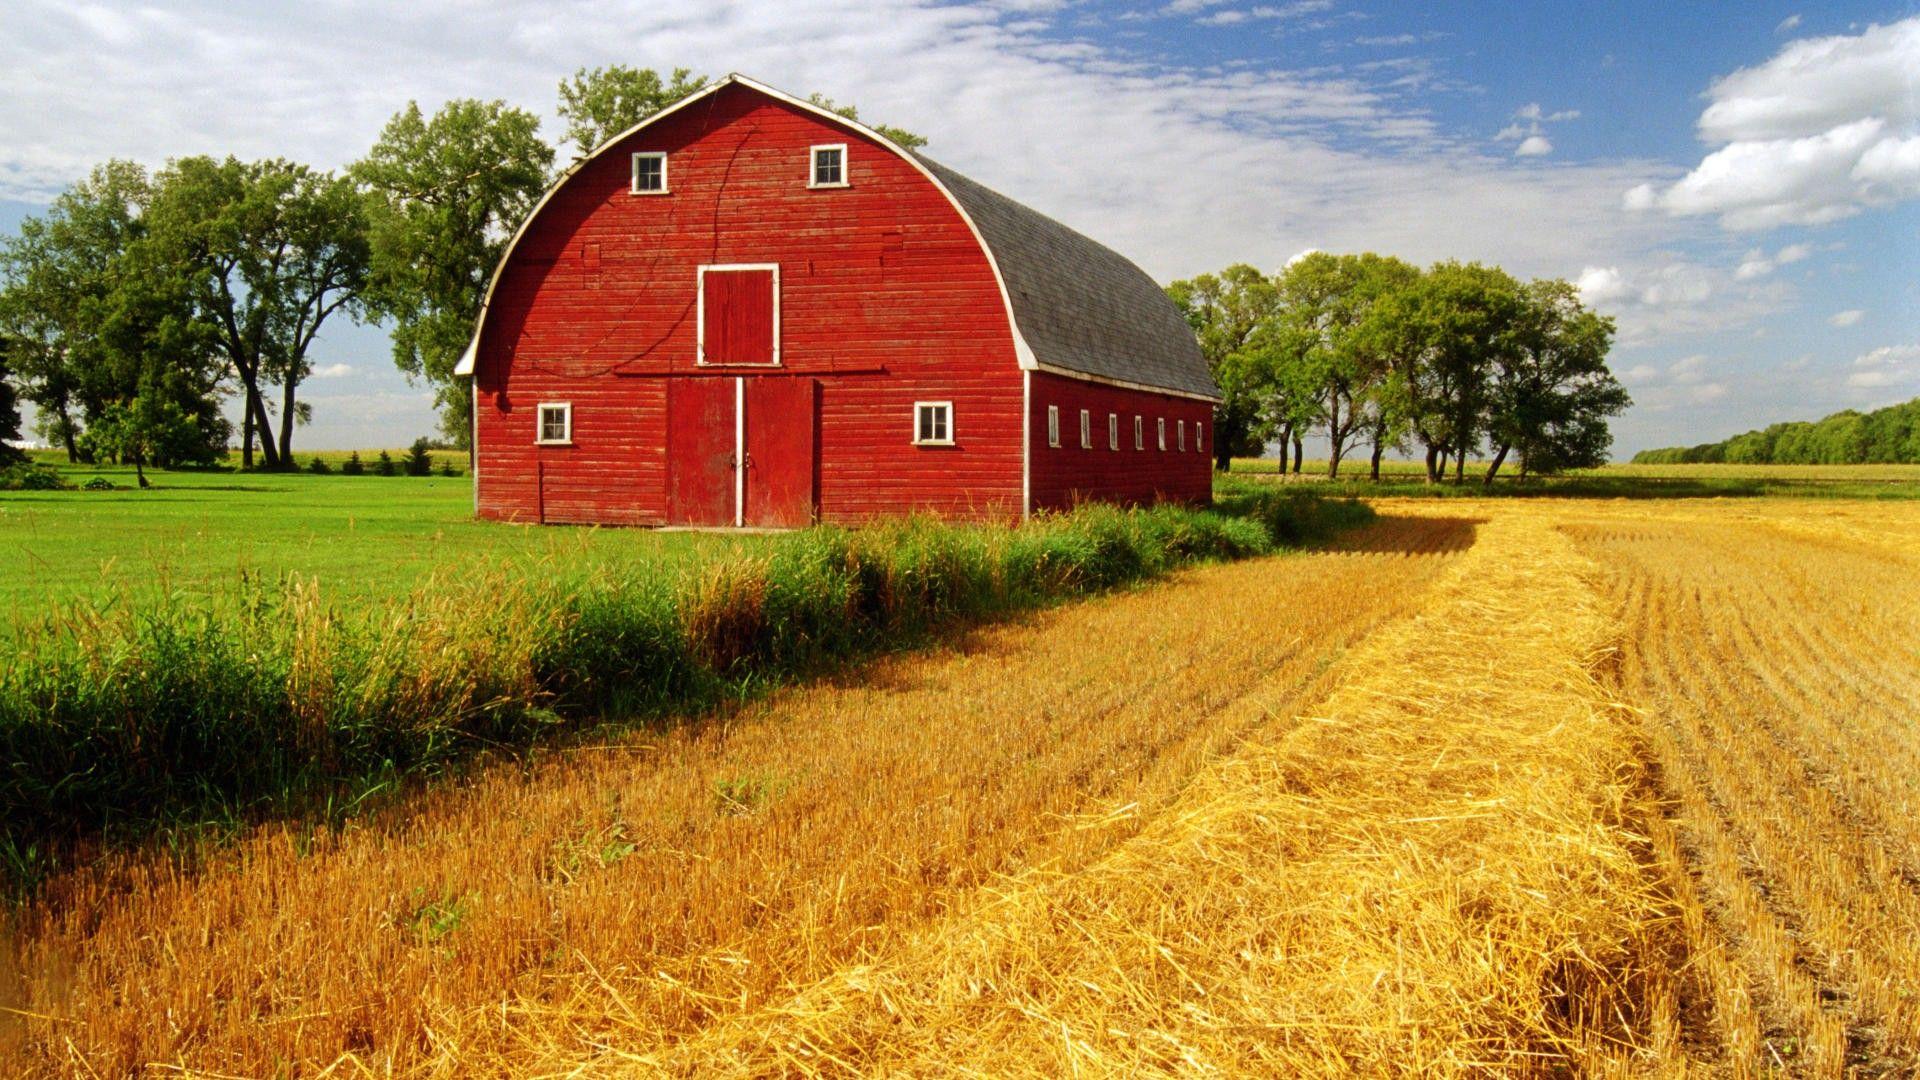 Man Made Barn Wallpaper. Country Farm. Barn Picture